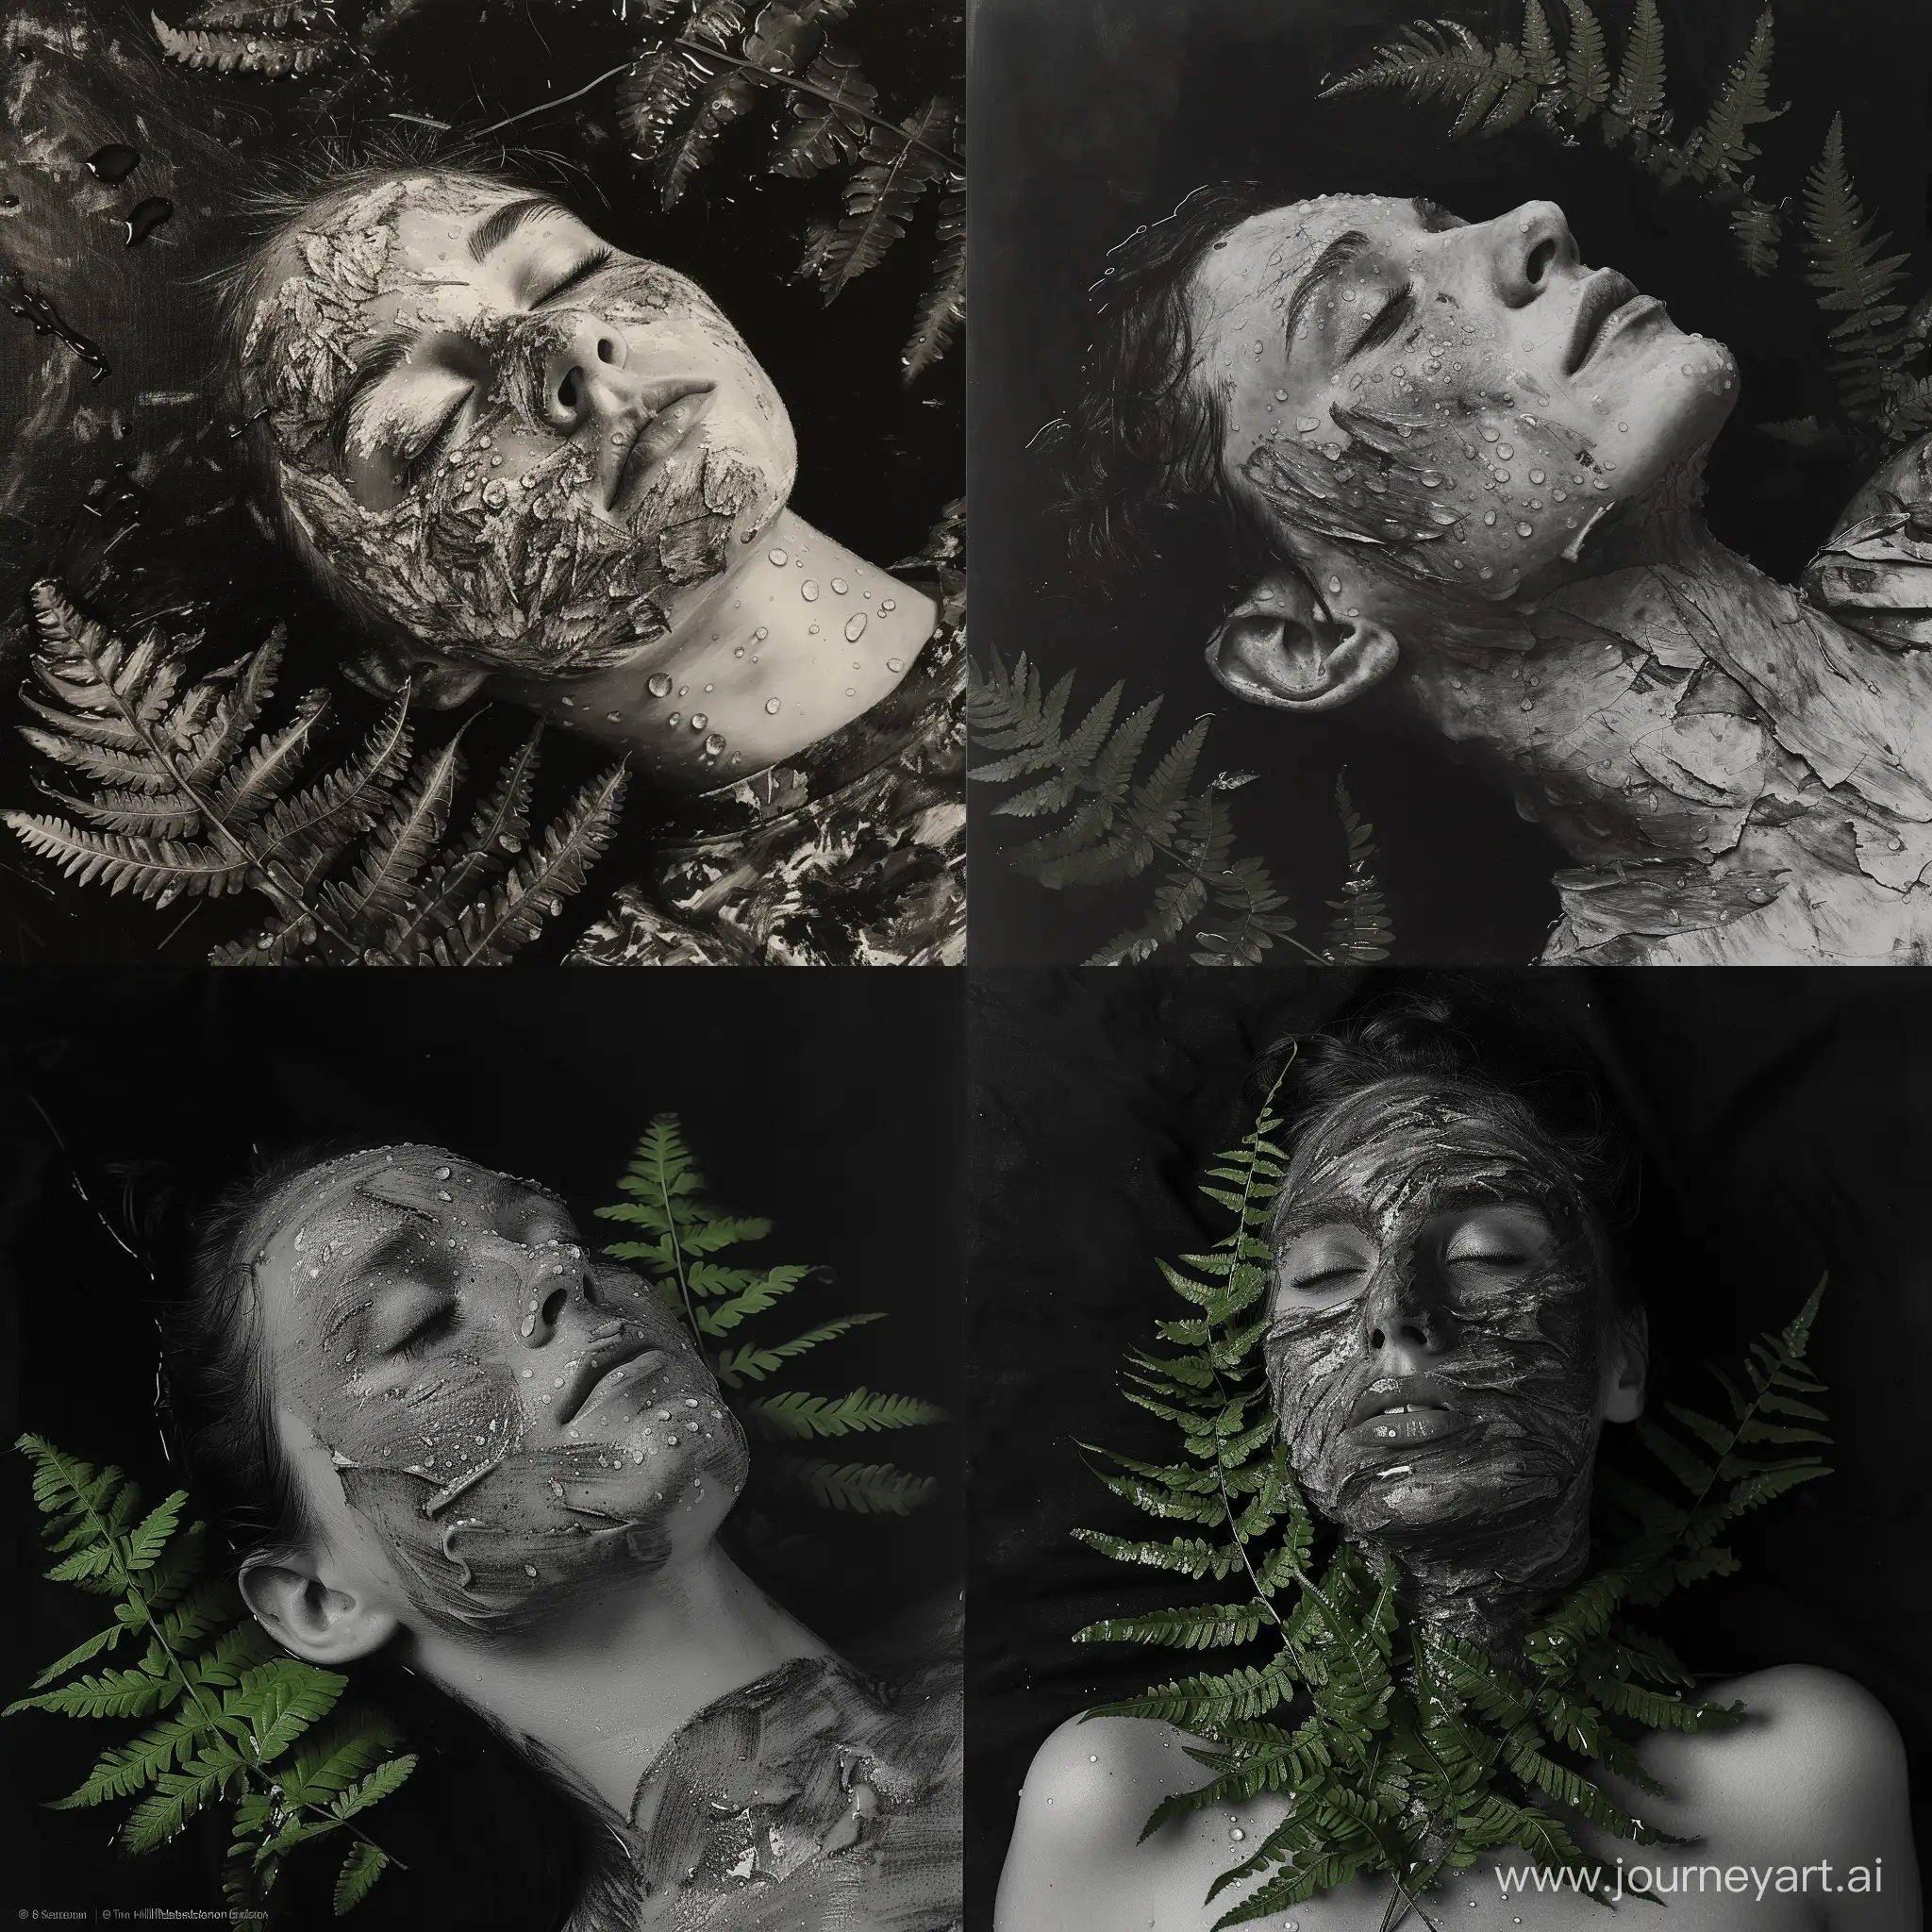 Black and white photograph of a reclining woman, Frederic Vermeeren, art photography, raindrops on face, top view, green fern leaves lying on her chest, monochrome, wildlife portrait, Tim Hildebrandt, 8 k art photography, weathered face, high detail, oil watercolor in broad strokes.  v6